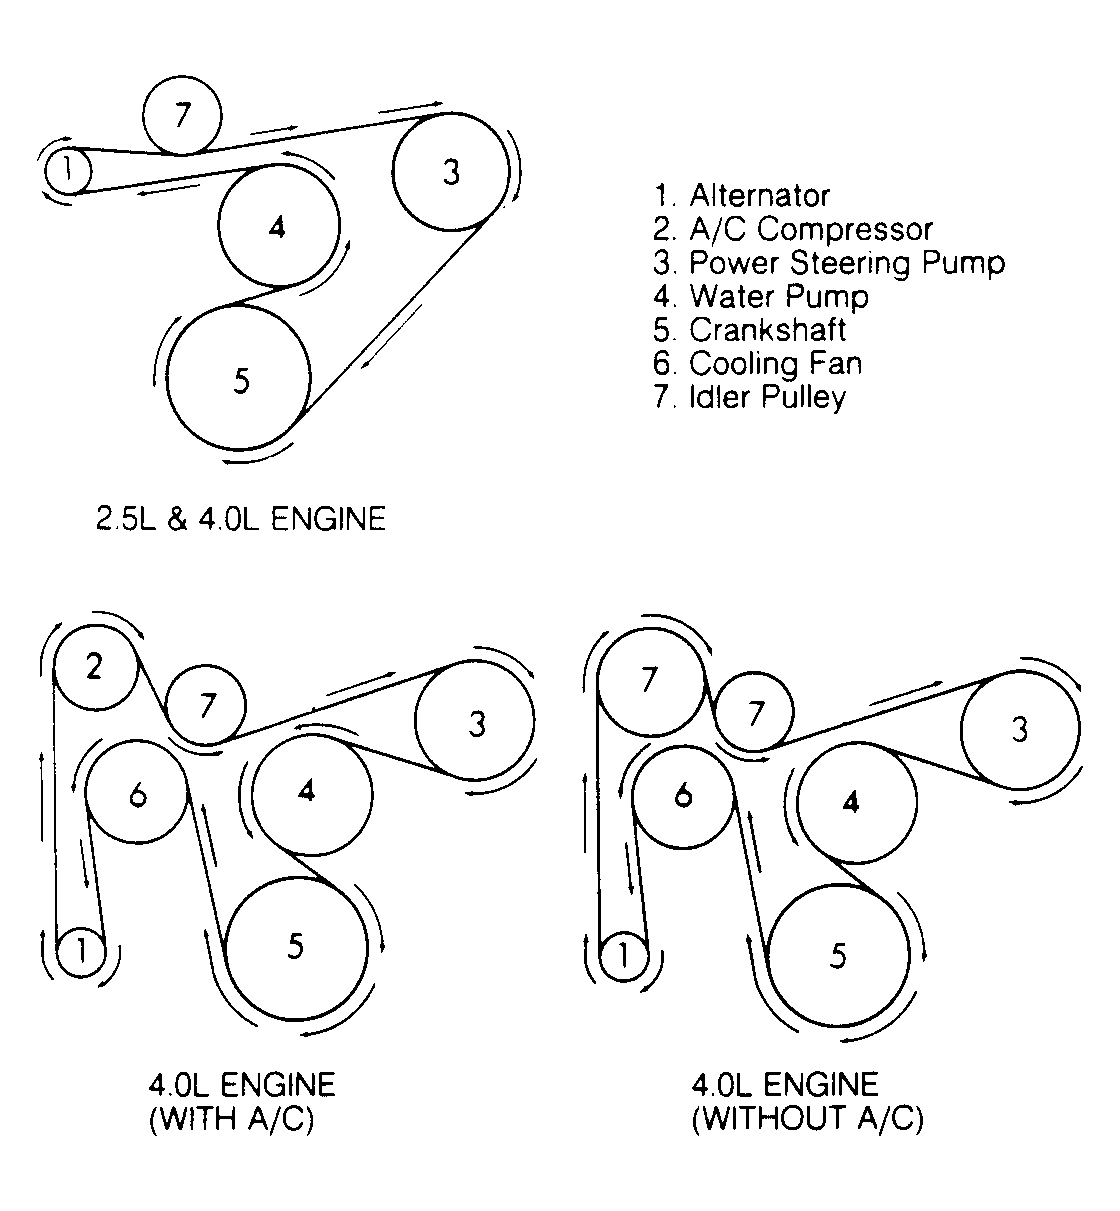 1991 Jeep Wrangler Serpentine Belt Routing and Timing Belt Diagrams